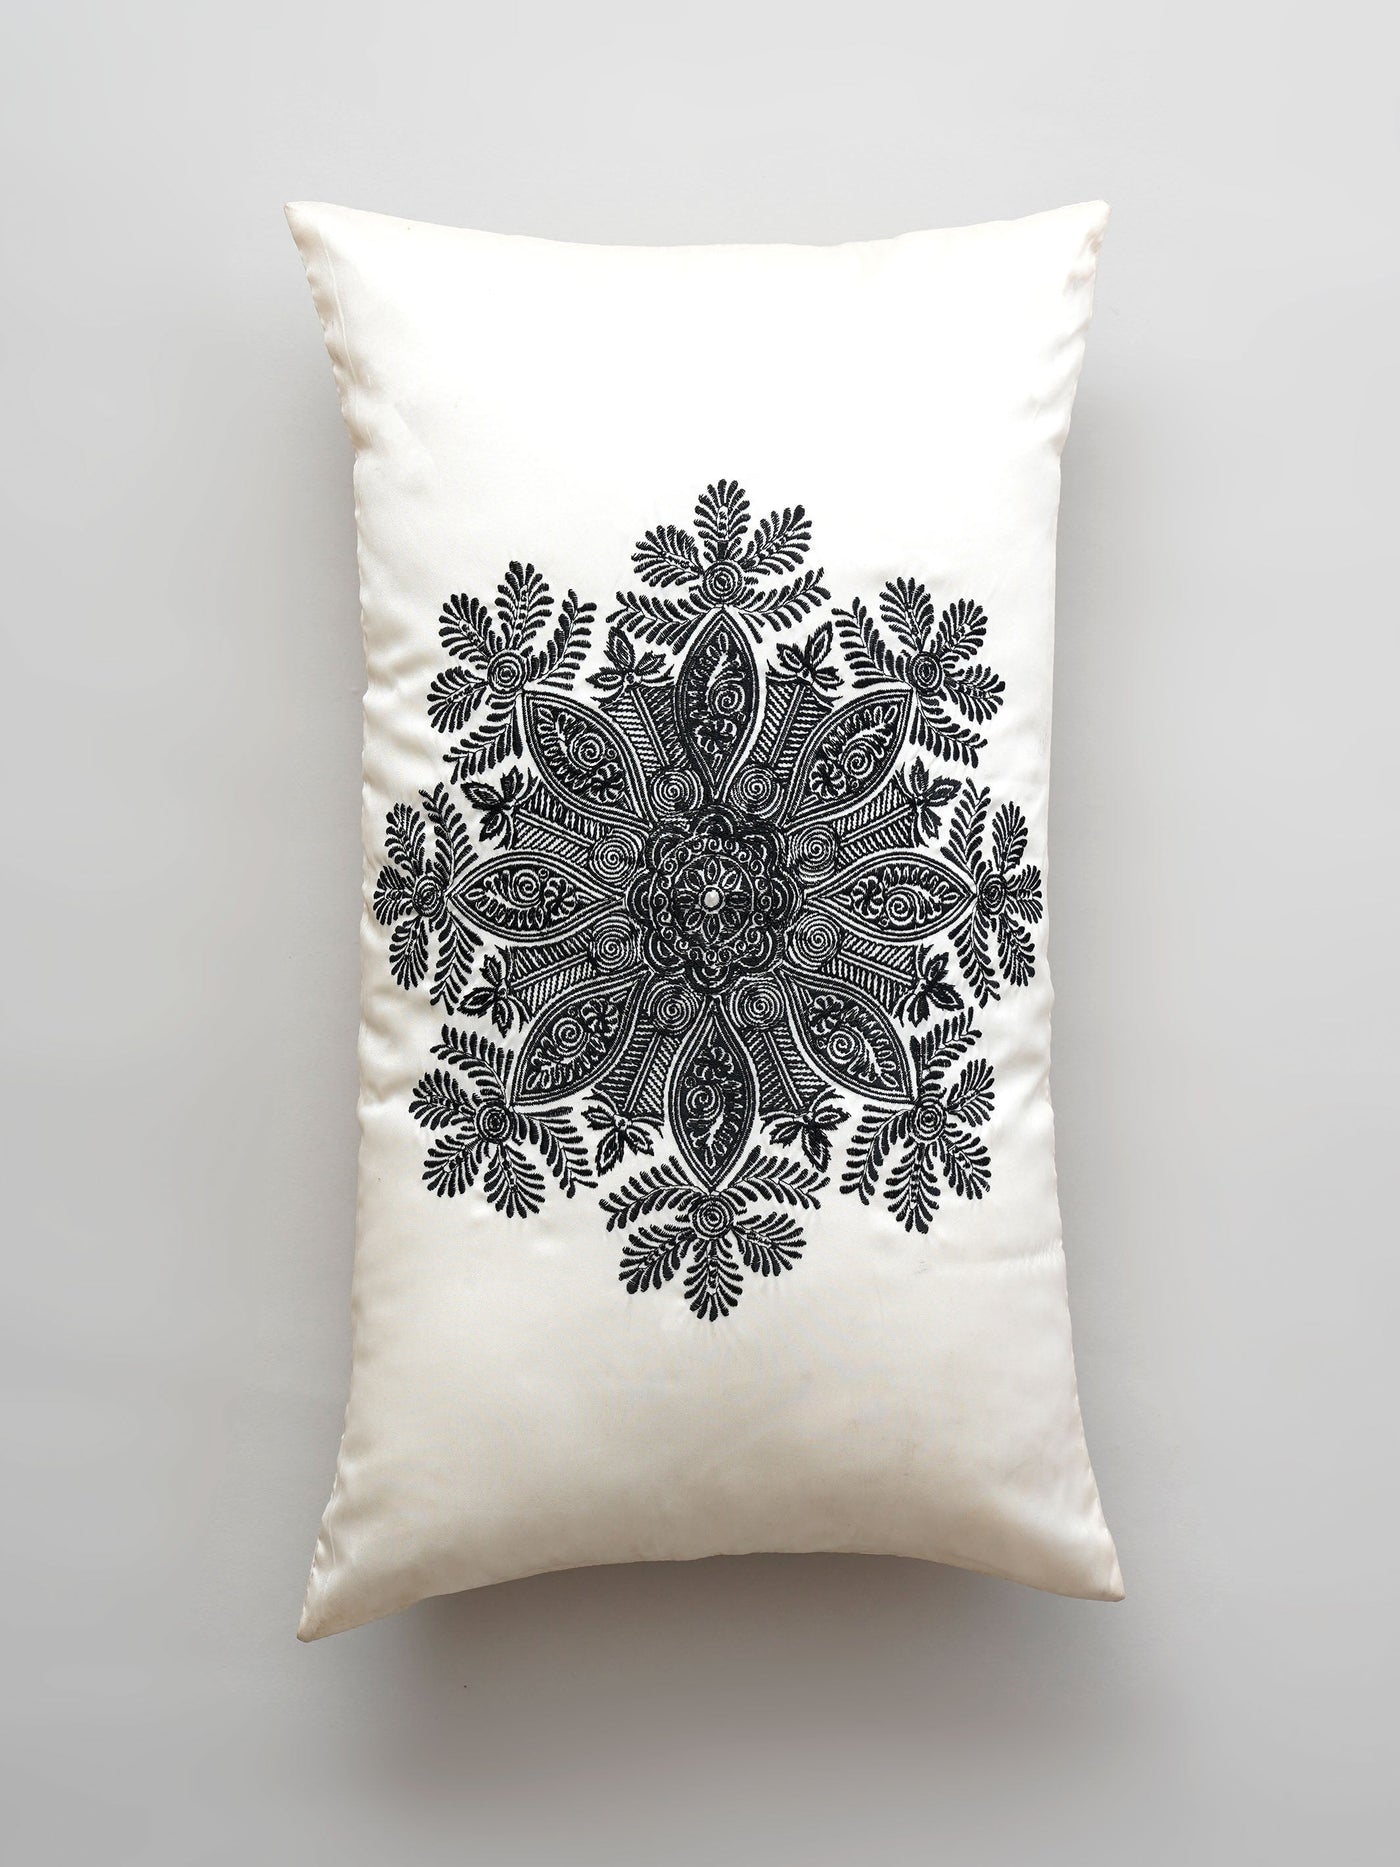 Medallian Embroidered Cushion